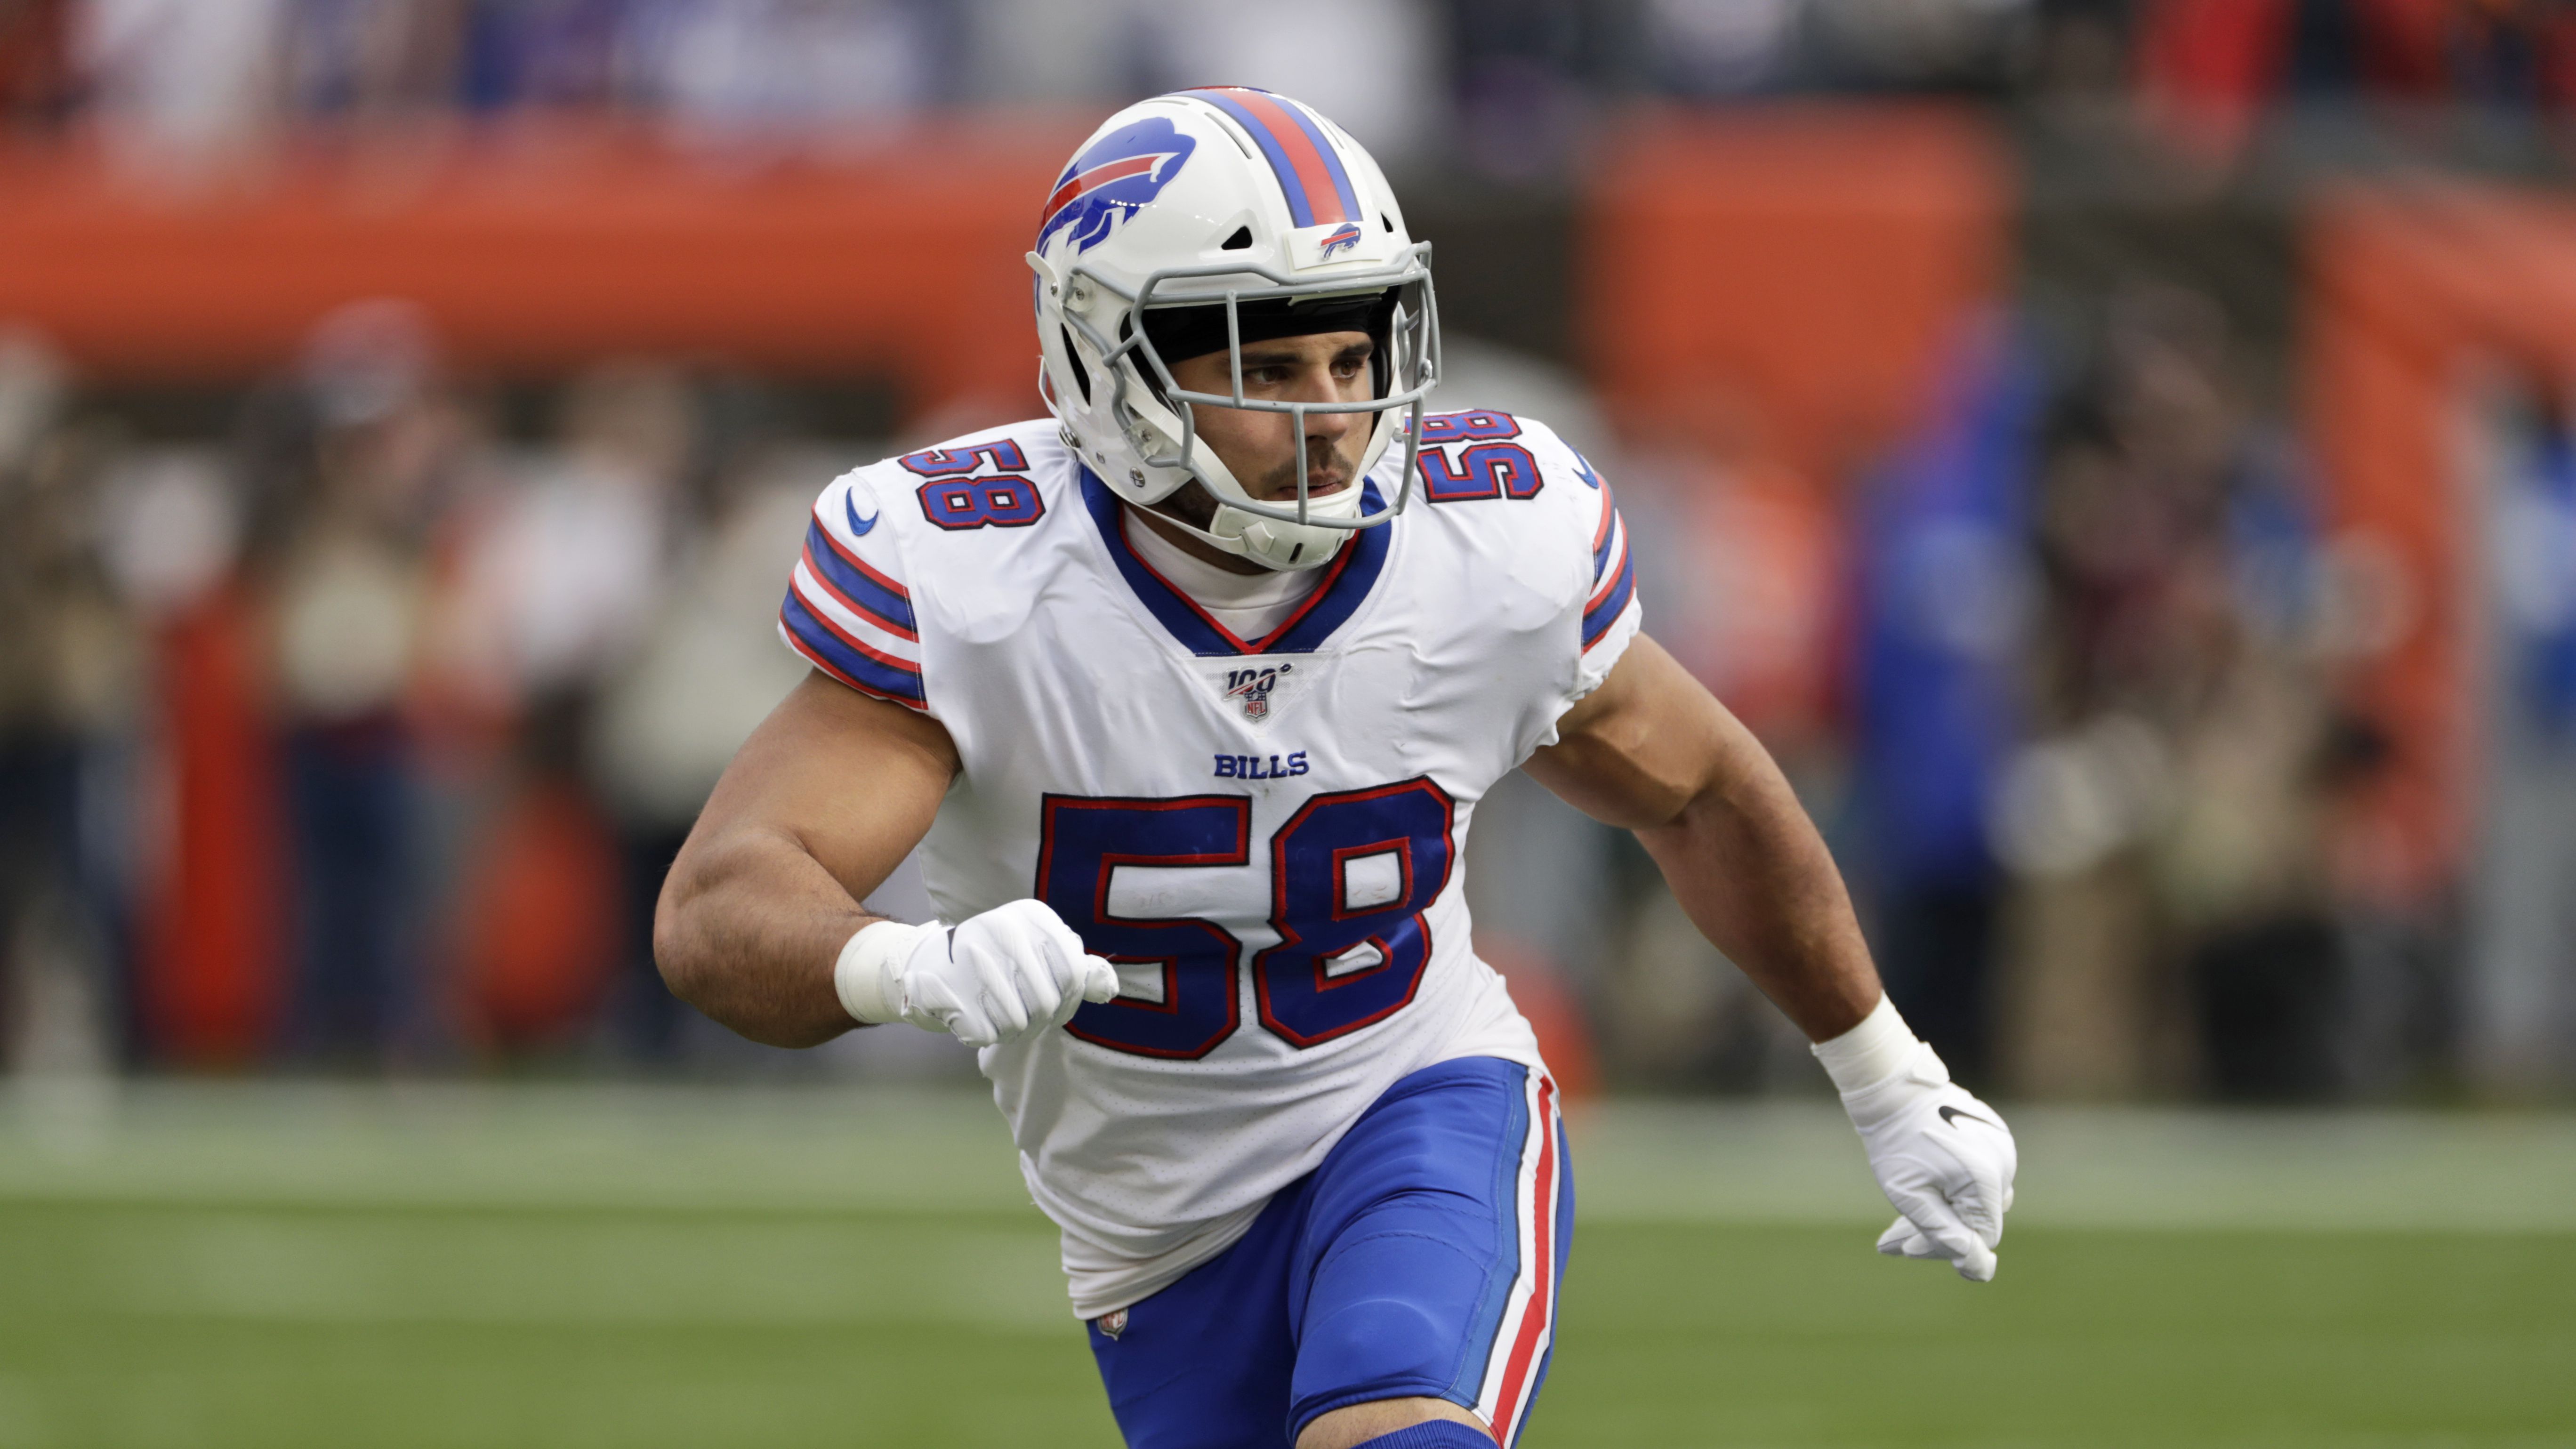 Bills sign left tackle Dawkins to four-year contract extension